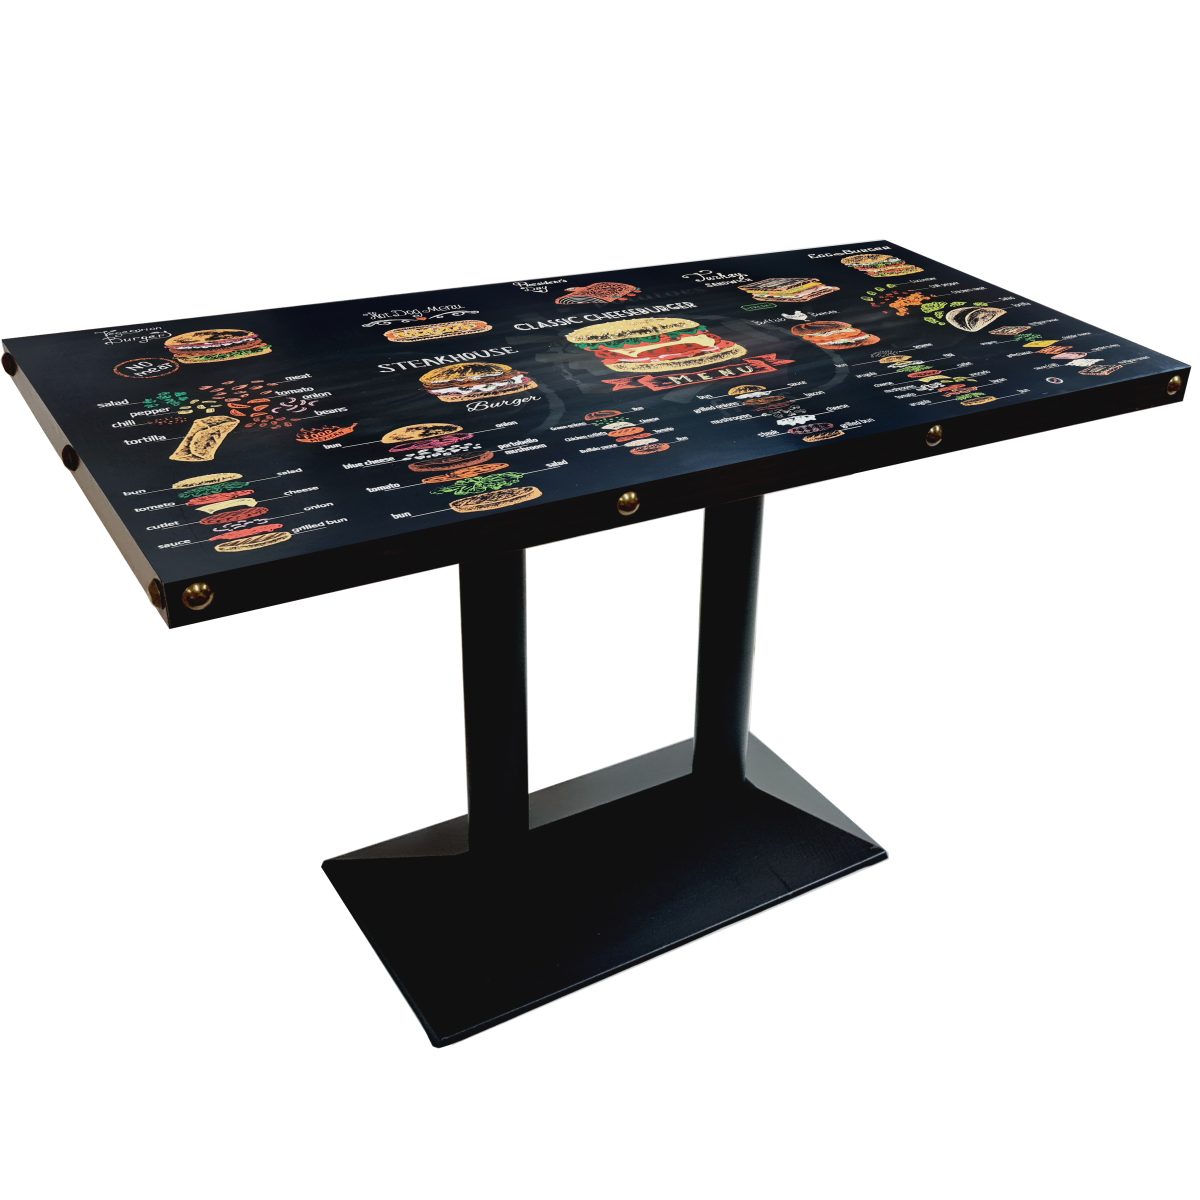 Burger Shop Table with Top Cast Iron Black Base